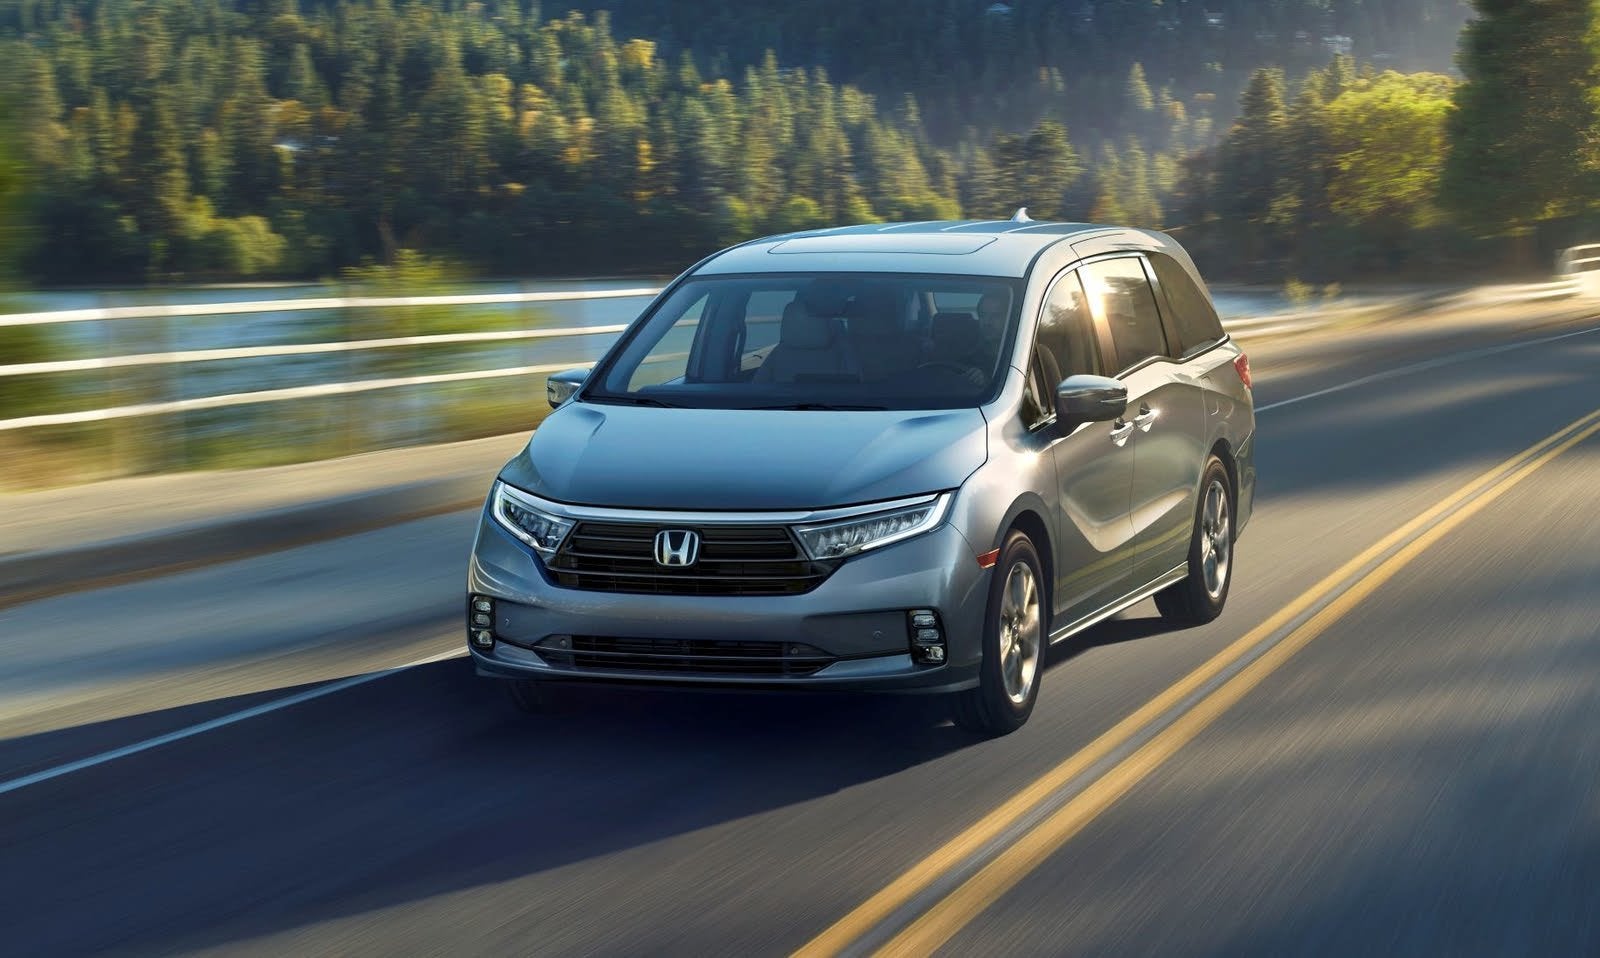 The Best Minivans for Camping 2022 - CarGurus